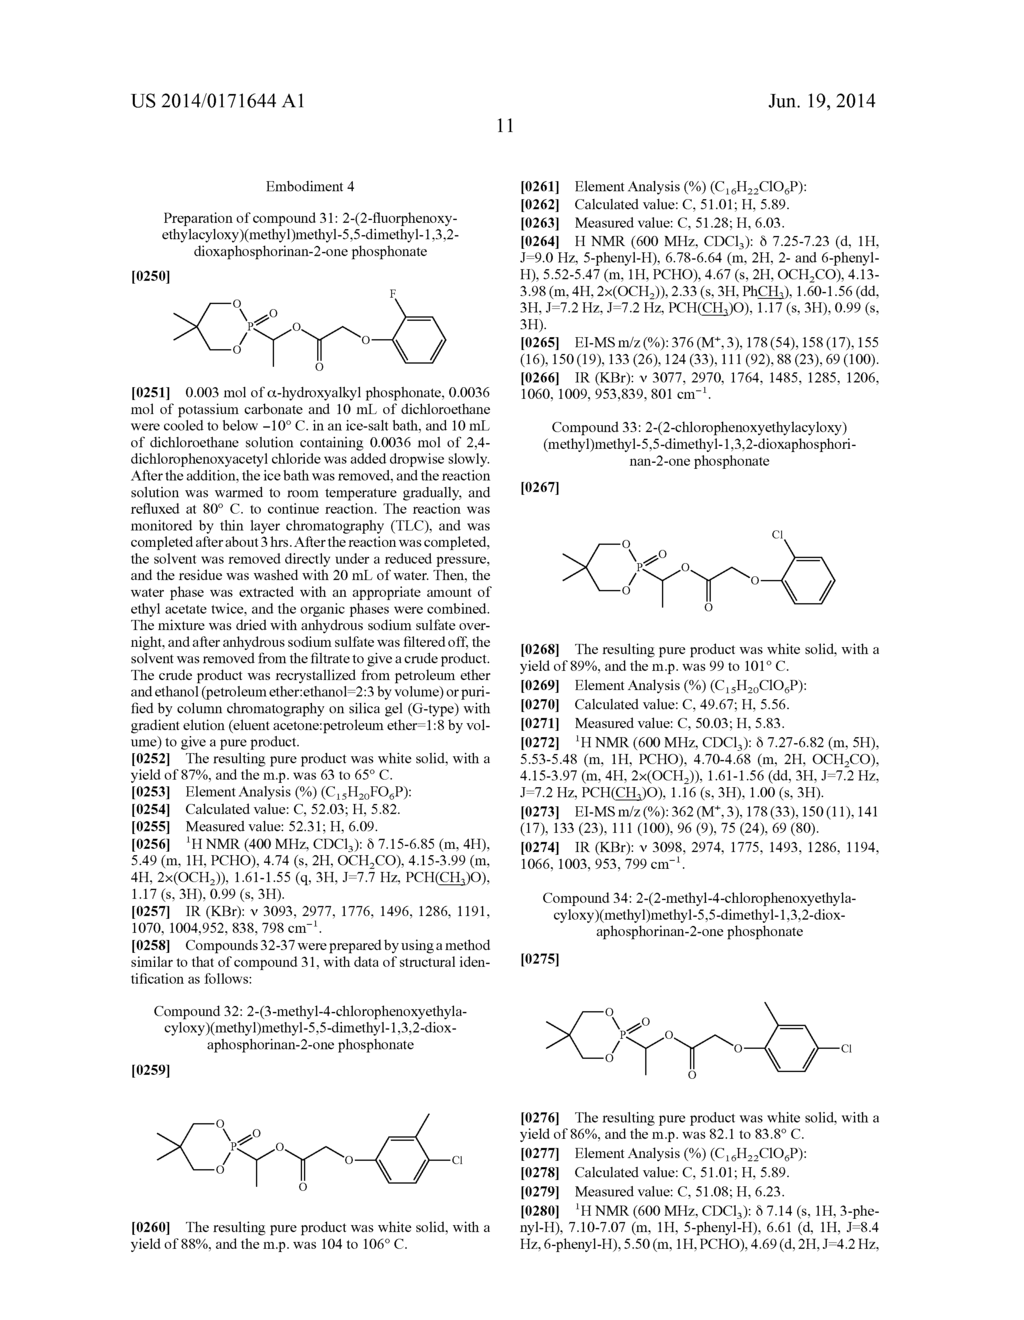 SUBSTITUTED PHENOXYETHYL (ISOPROPYL) ACYLOXYALKYL PHOSPHONATE COMPRISING     PHOSPHORUSHETEROCYCLIC RING AND HAVING HERBICIDAL ACTIVITY, AND     PREPARATION THEREFOR - diagram, schematic, and image 12